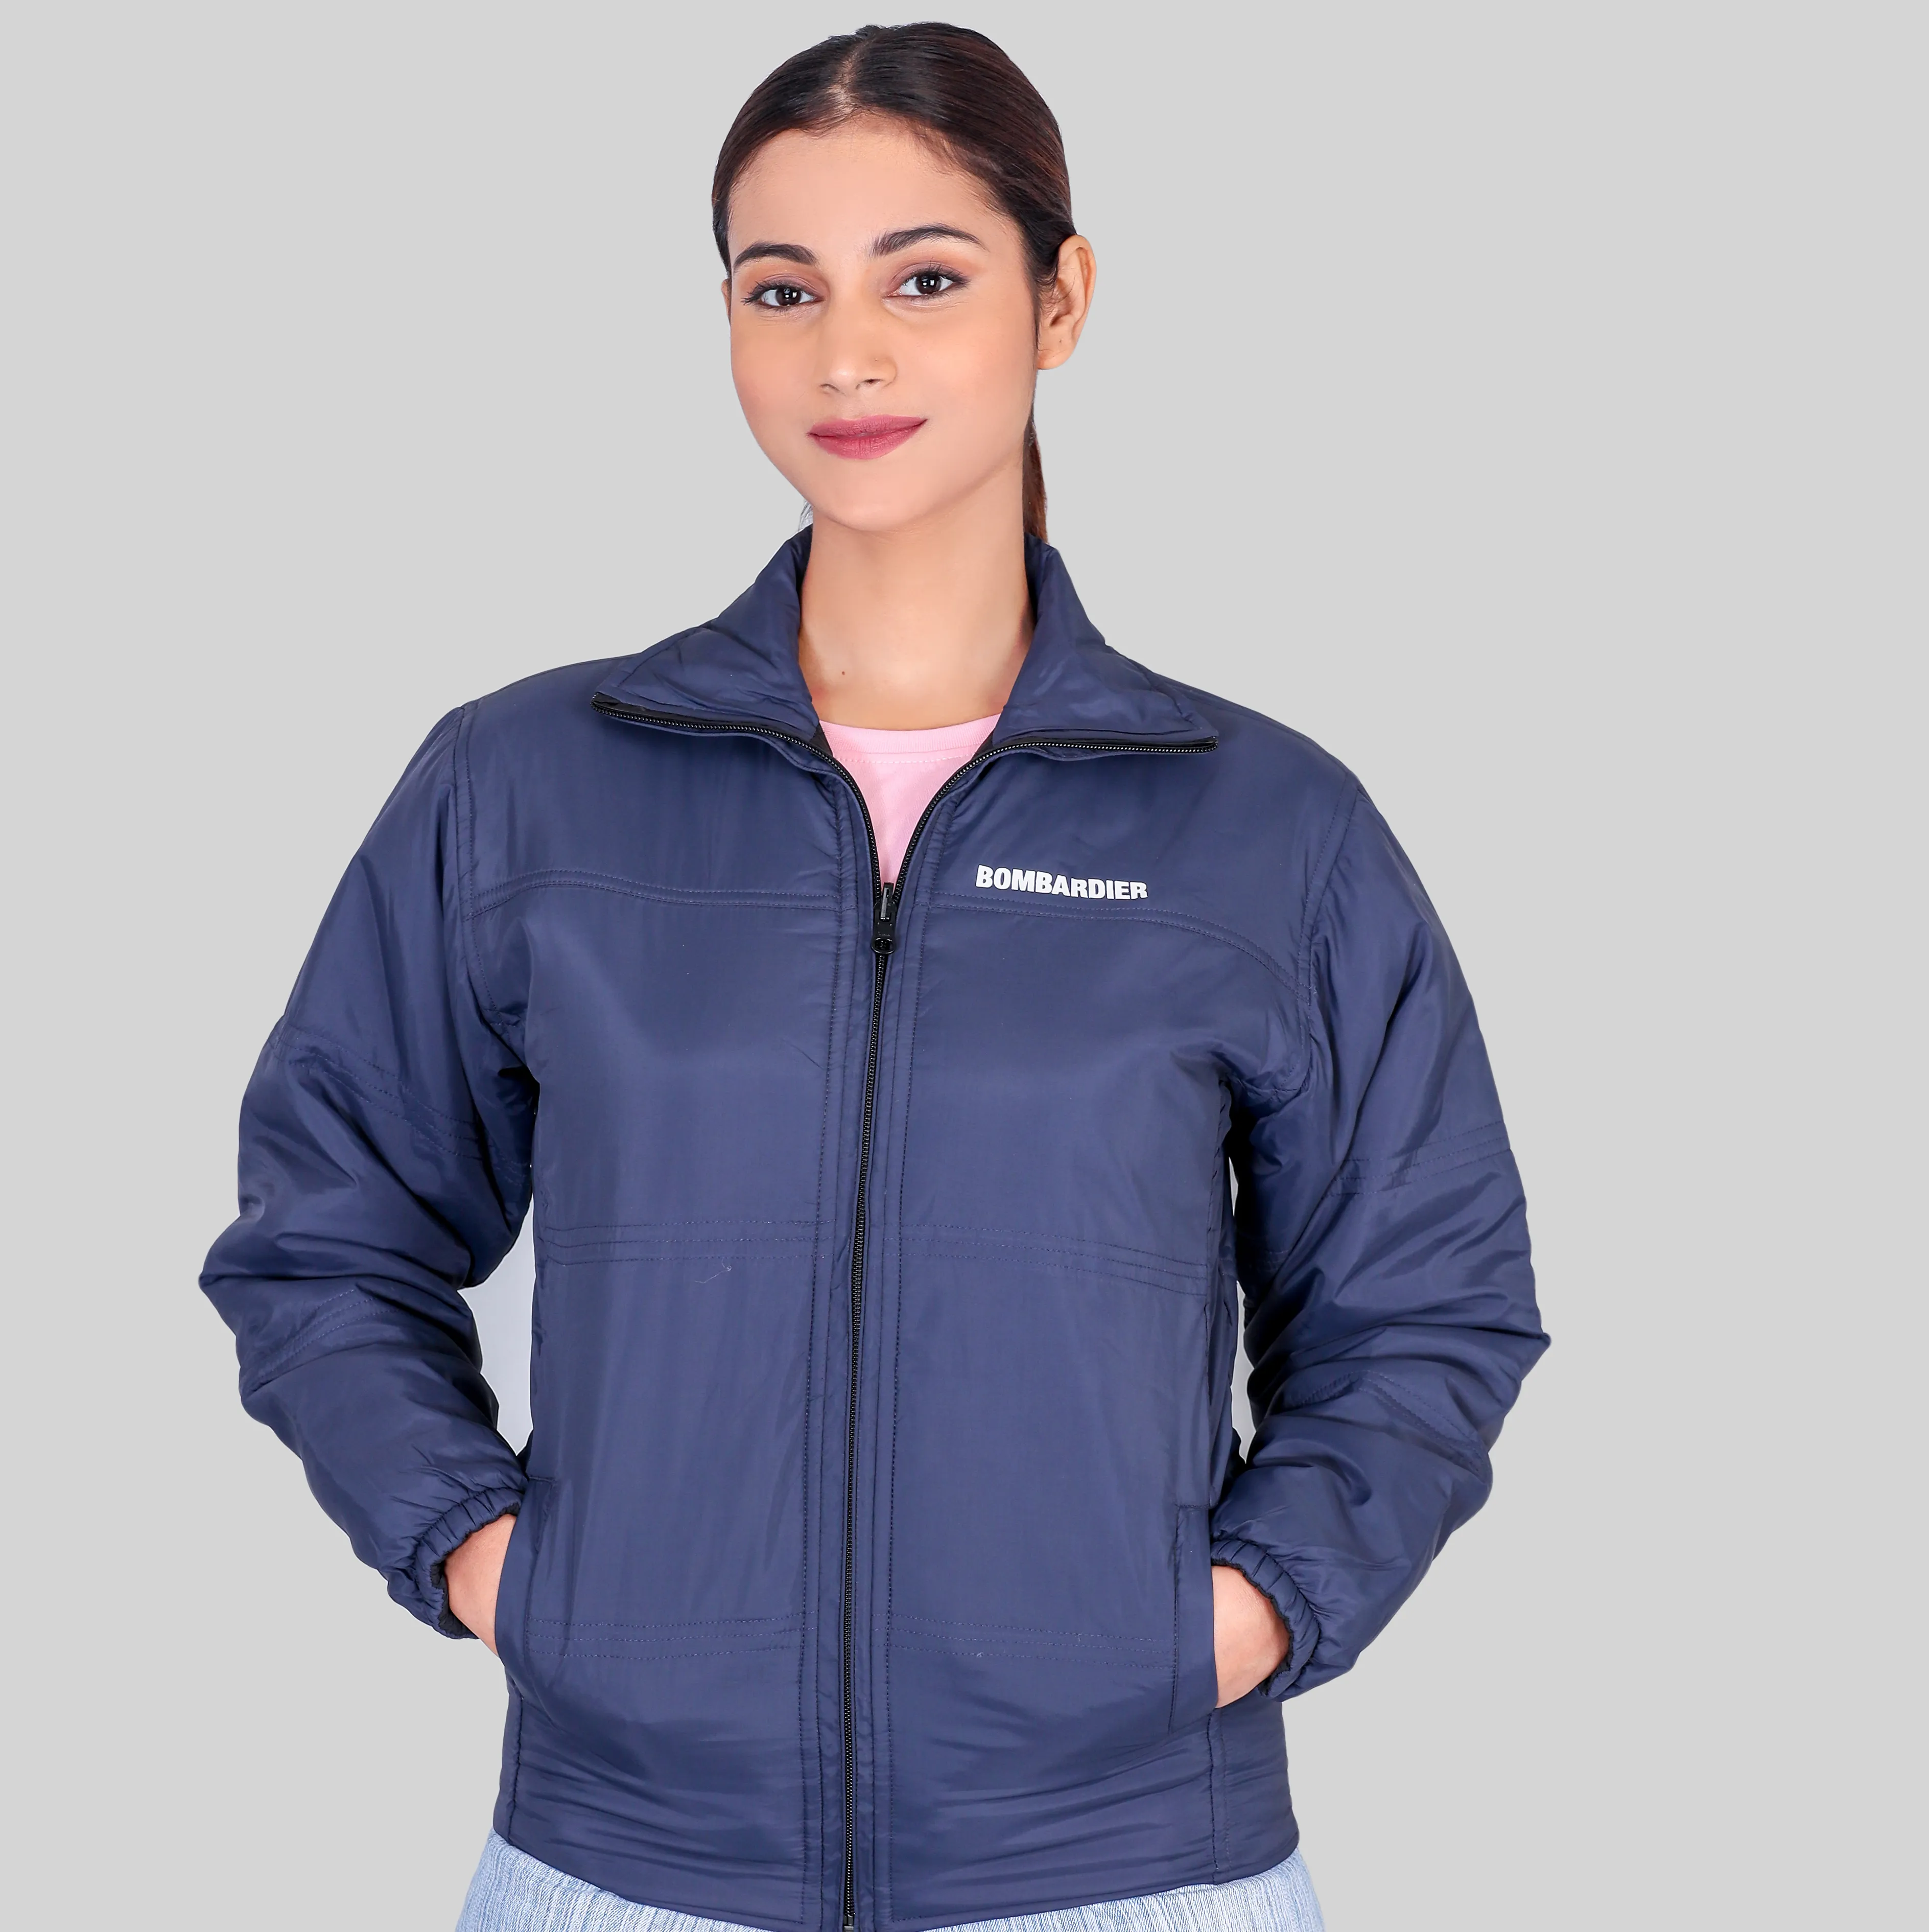 Corporate jackets manufacturer